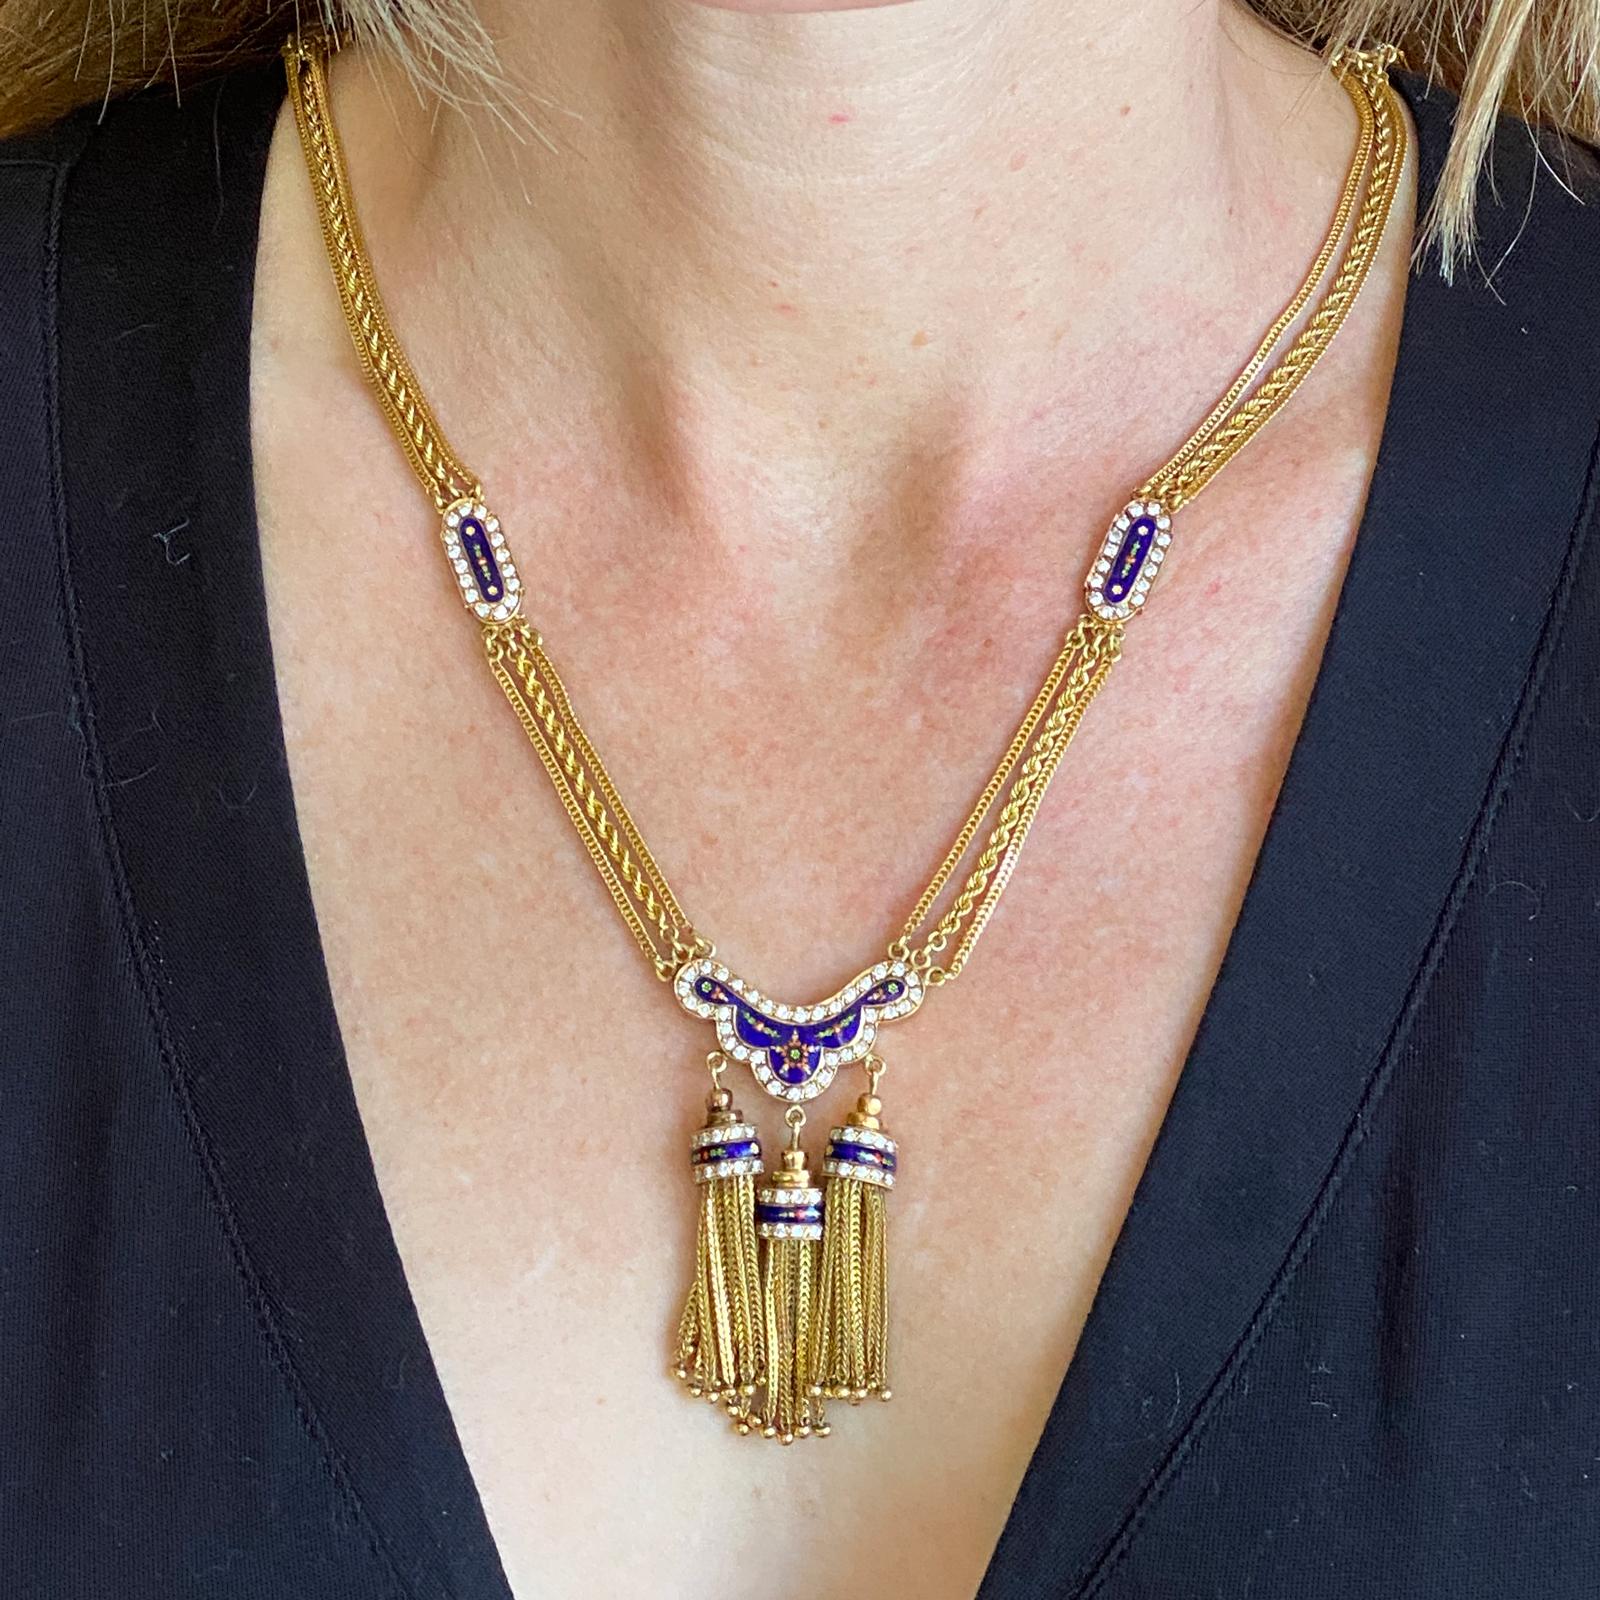 1950's diamond blue enamel tassel necklace fashioned in 18 karat yellow gold. The solid gold three strand necklace measures 22 inches in length, features 4 diamond enamel stations, and a center diamond enamel 3 tassel drop ( 2 inches in length). The